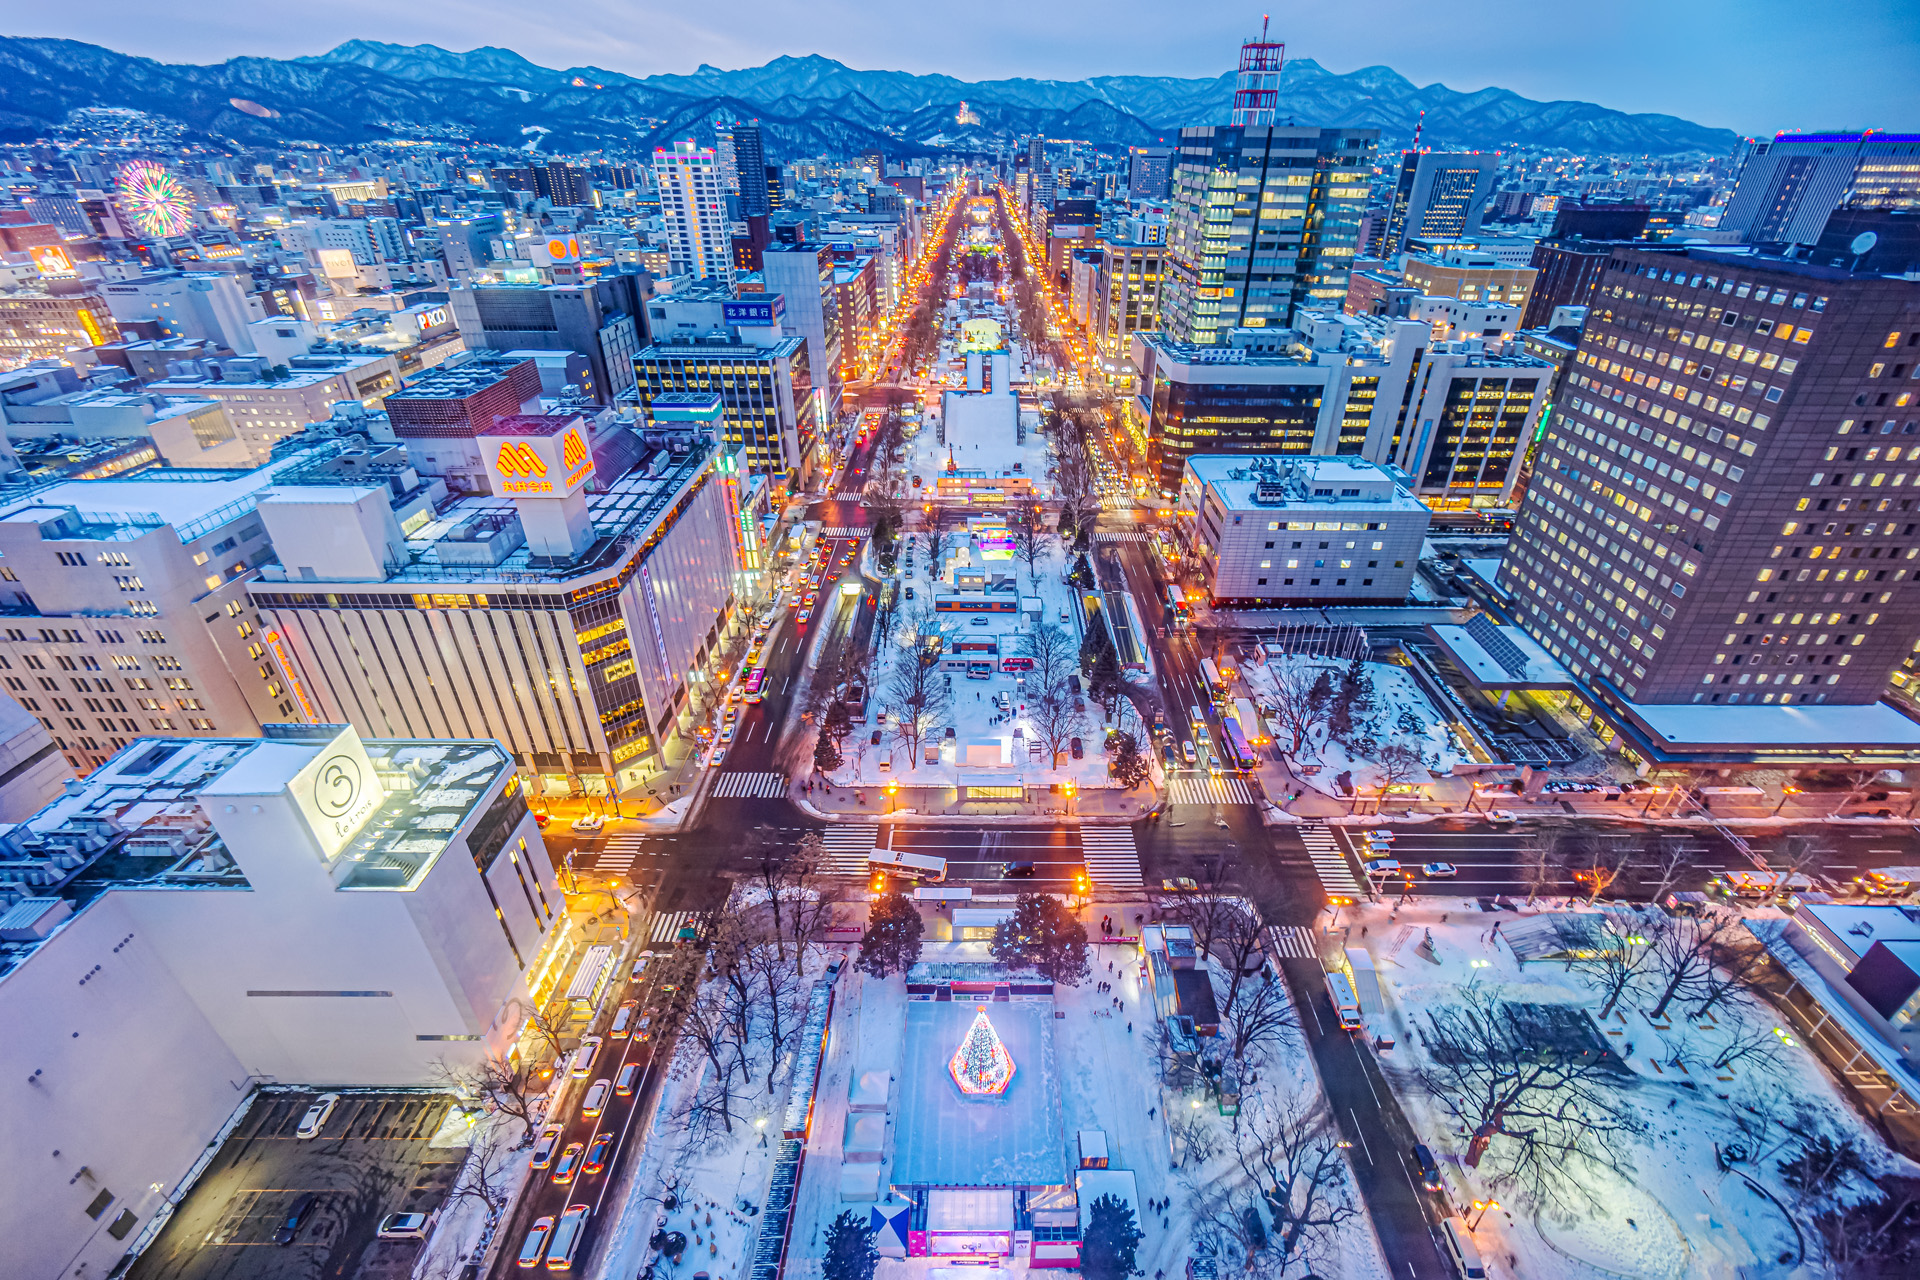 The park serves as the main site of the Sapporo Snow Festival in winter